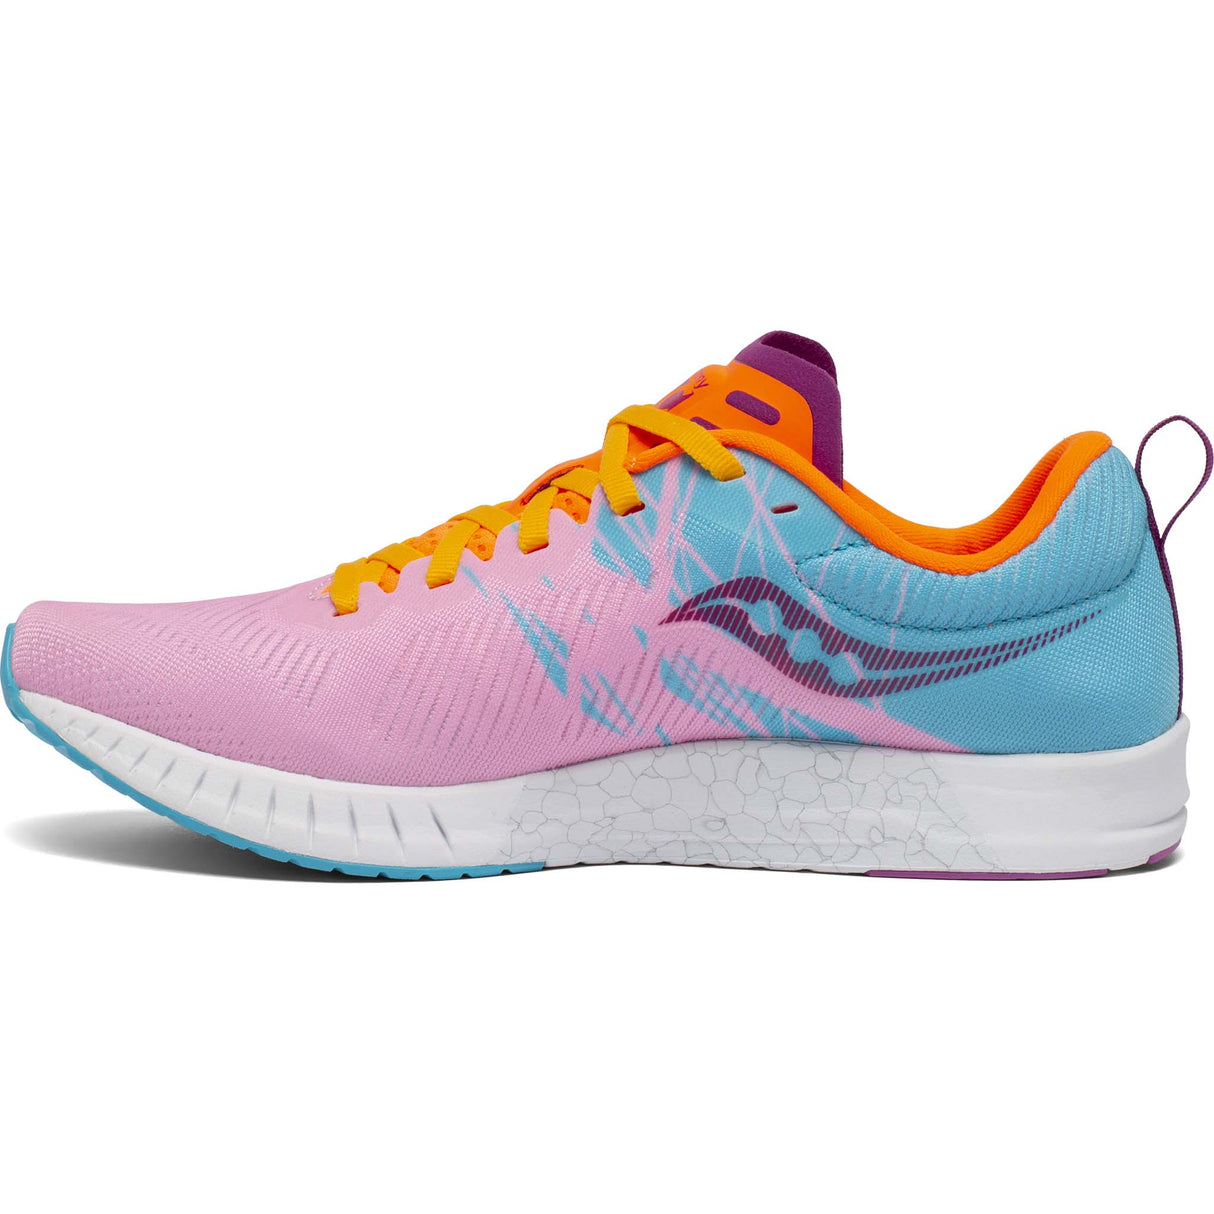 Saucony Fastwitch 9 chaussure de course a pied femme future pink lateral